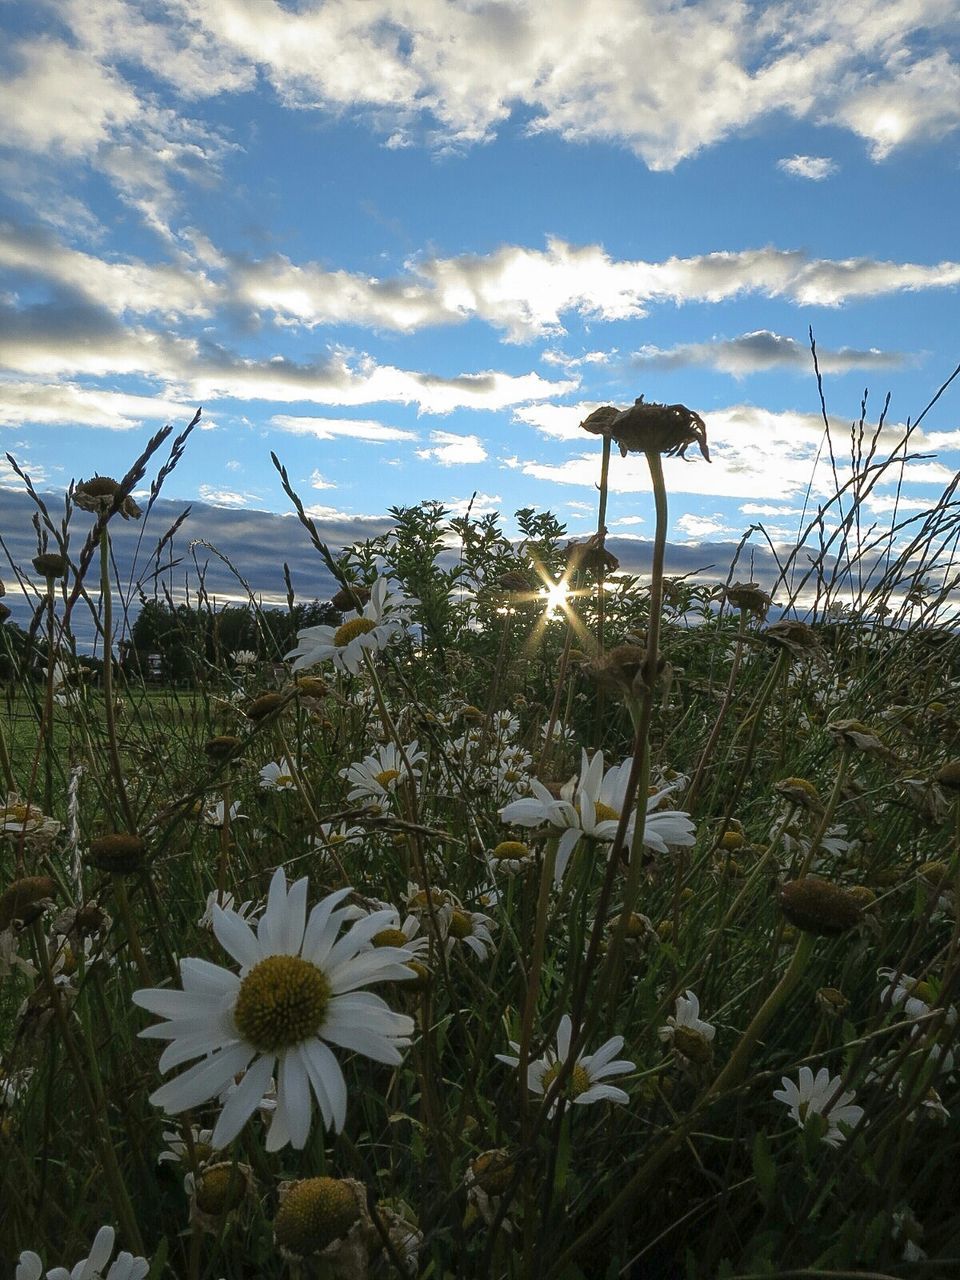 Daises blooming on field against sky